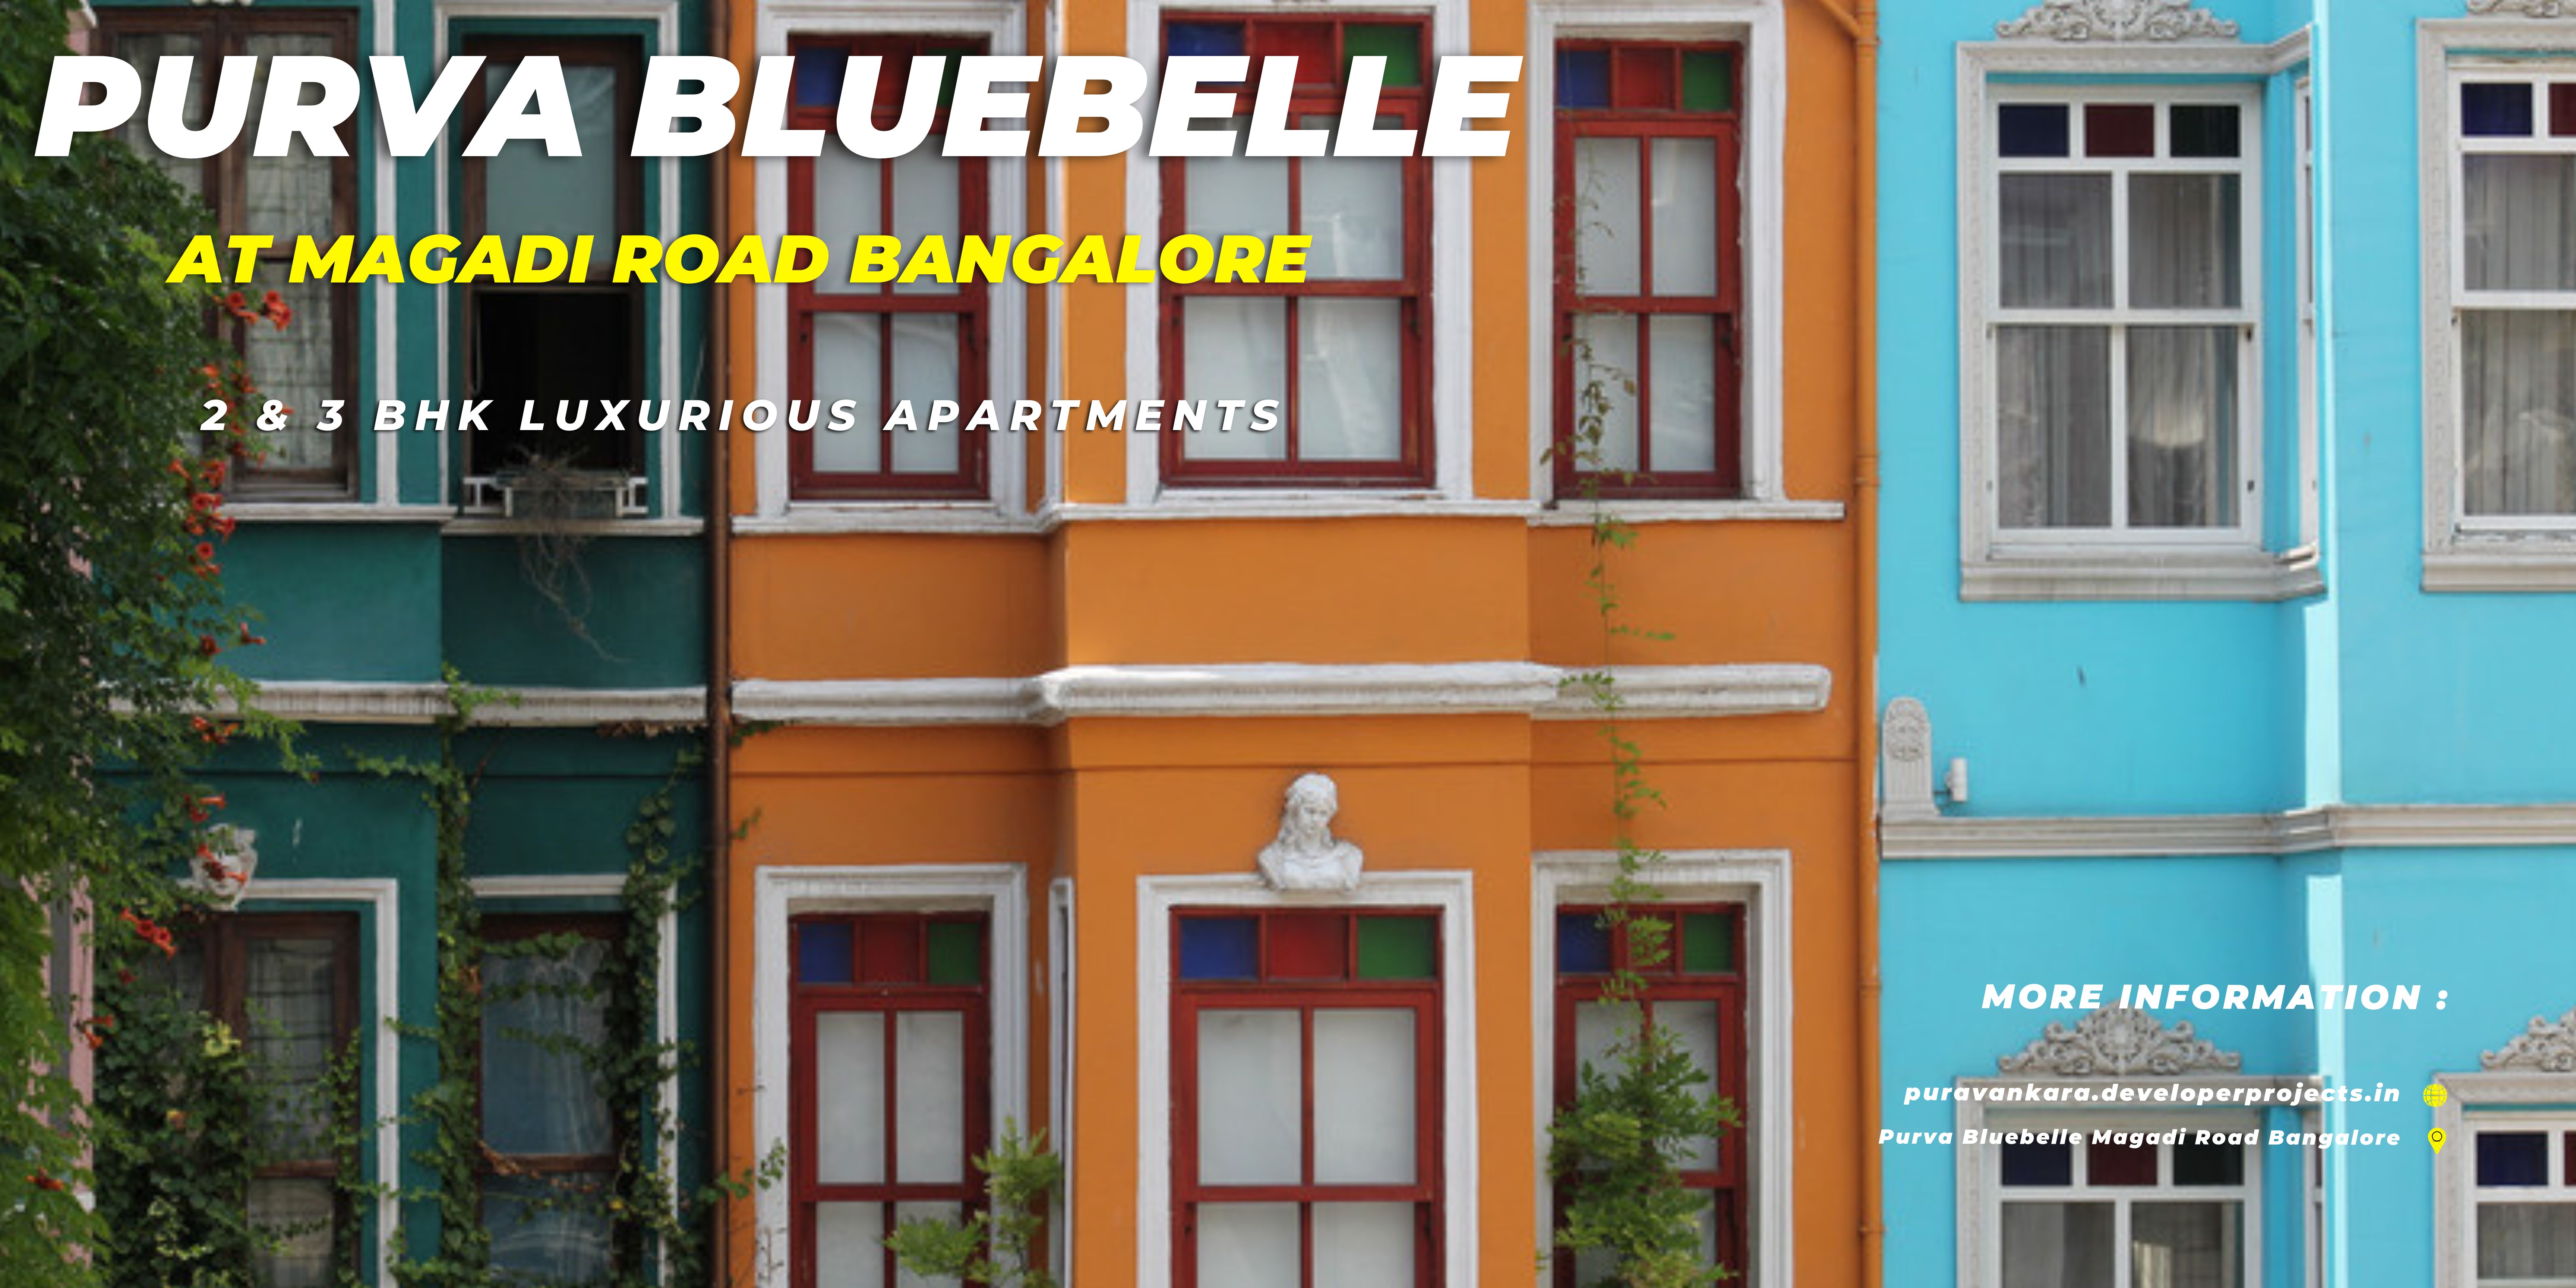 Purva Blue Belle at Magadi Road Bangalore | The Perfect Place To Build Your Dream Home